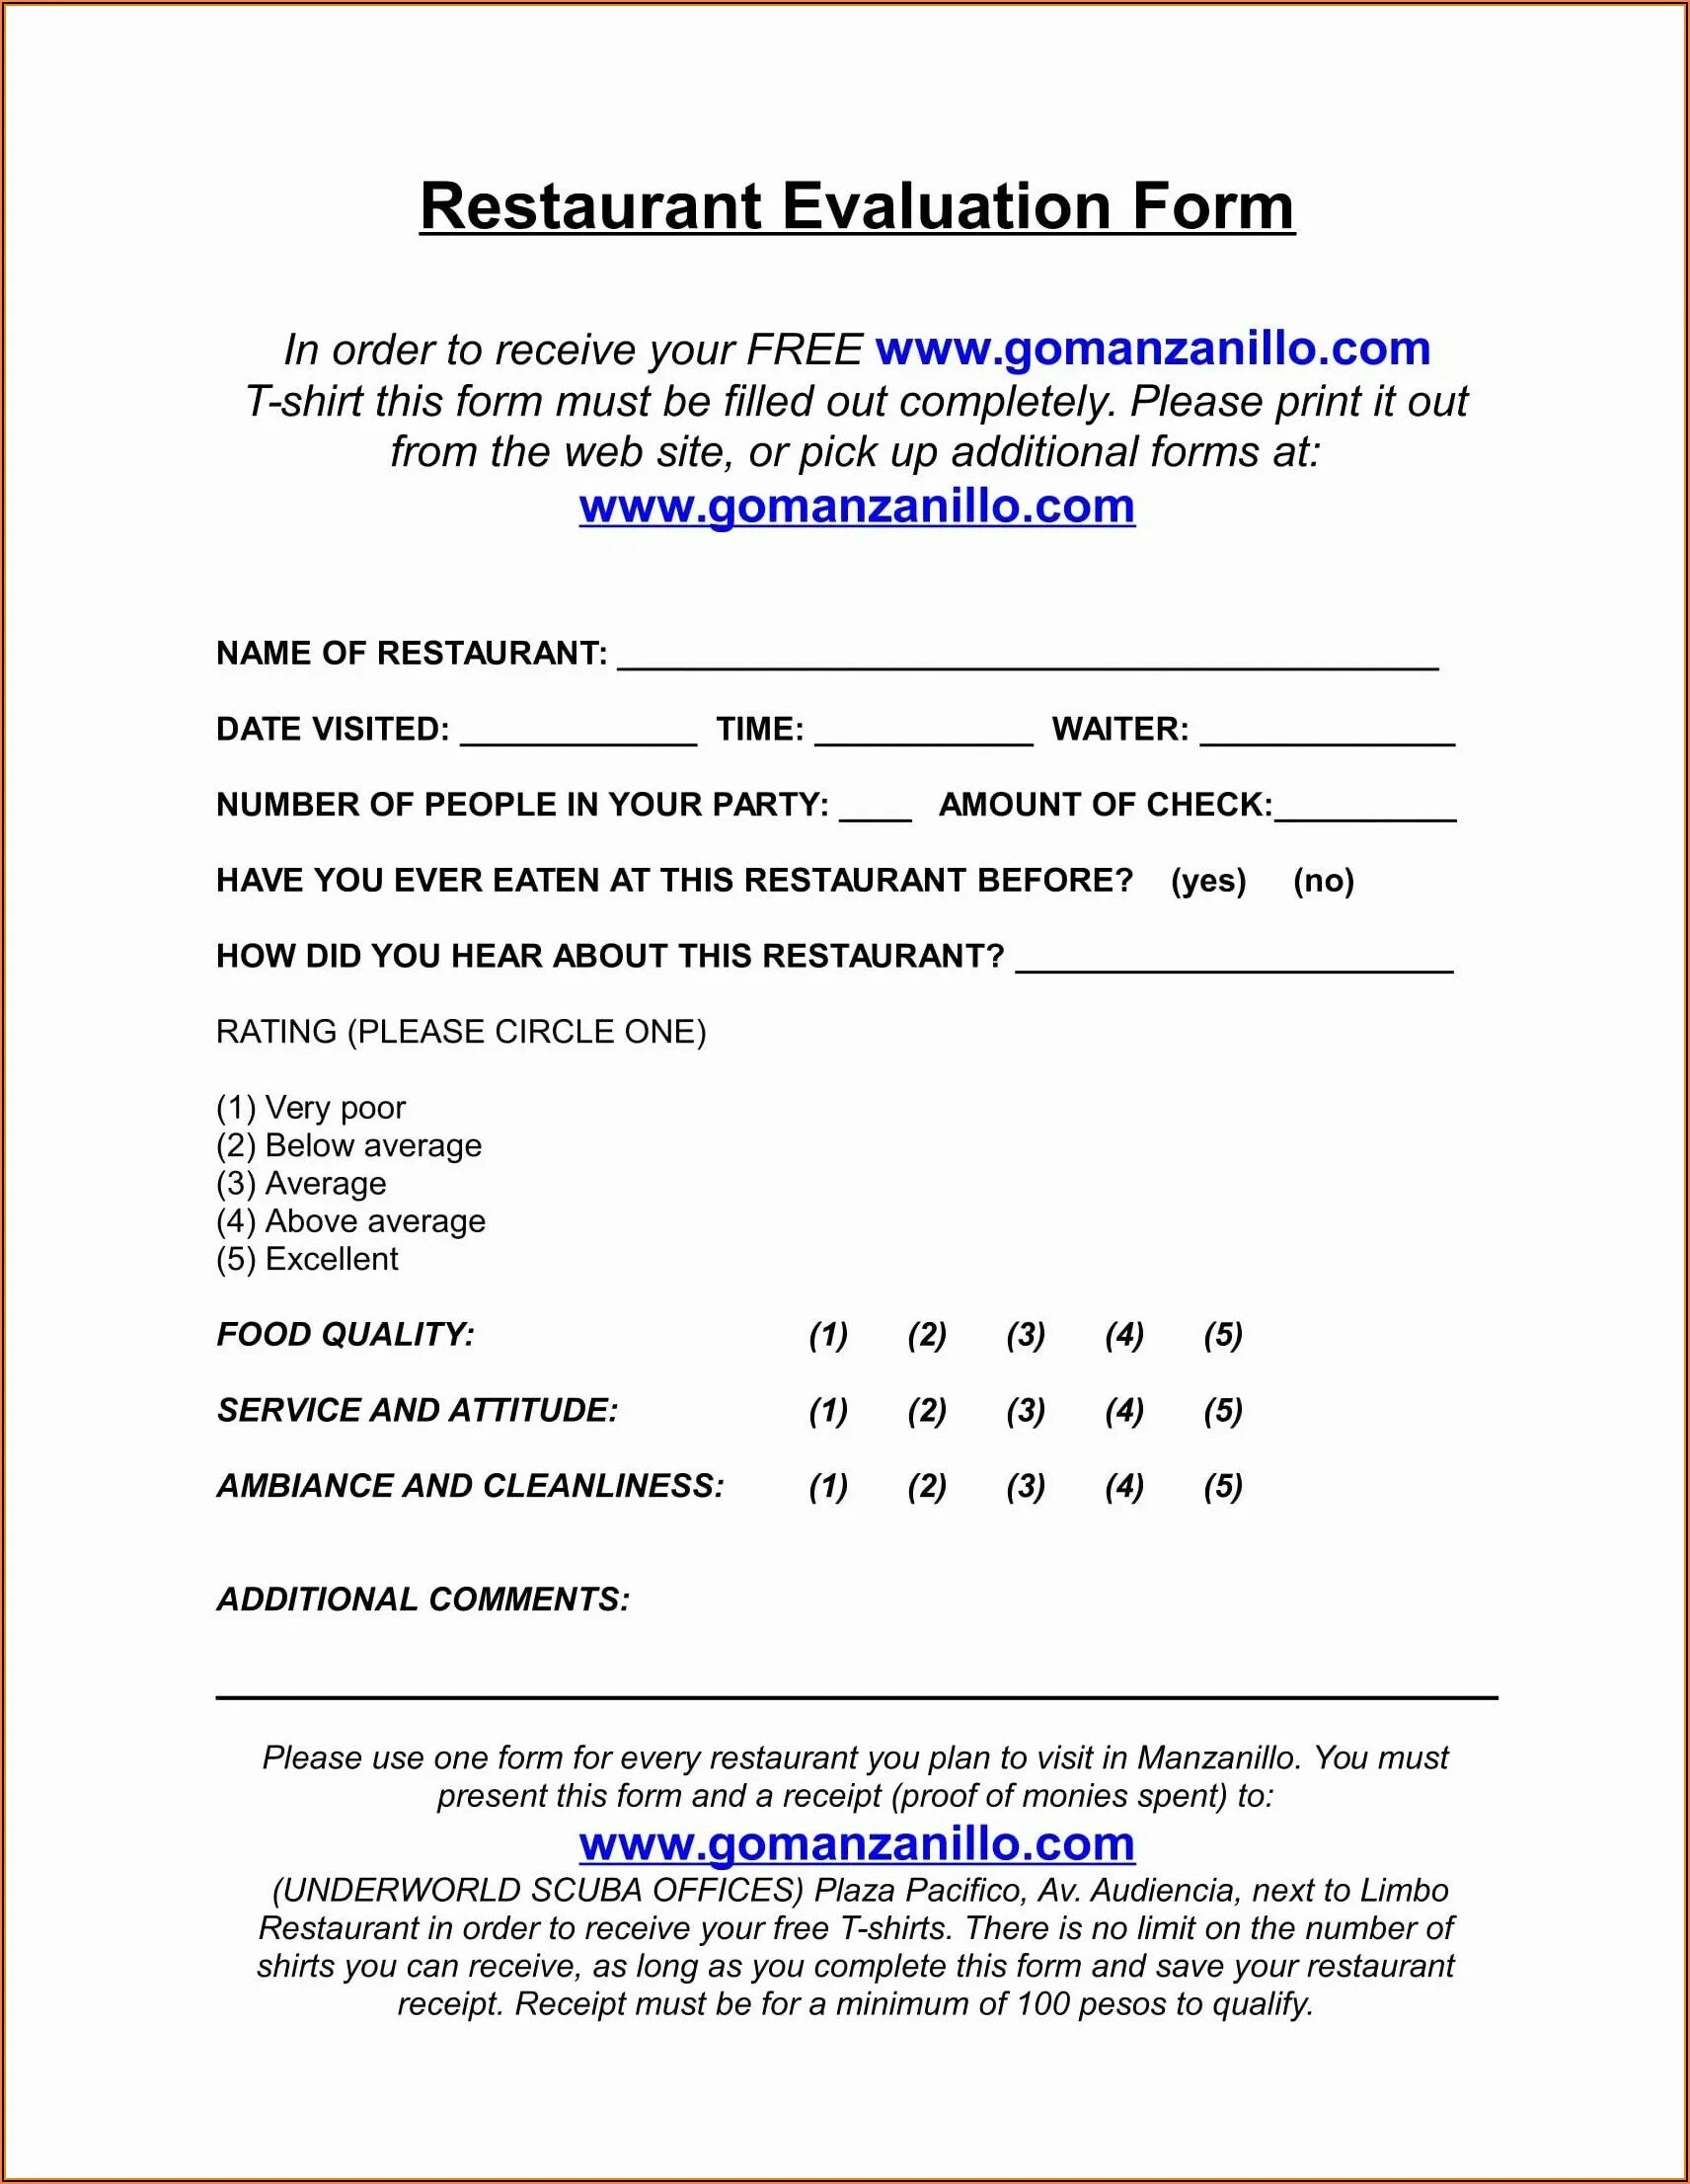 Employee evaluation. Second form evaluation. Evaluation form for New year Party event. Rest forms